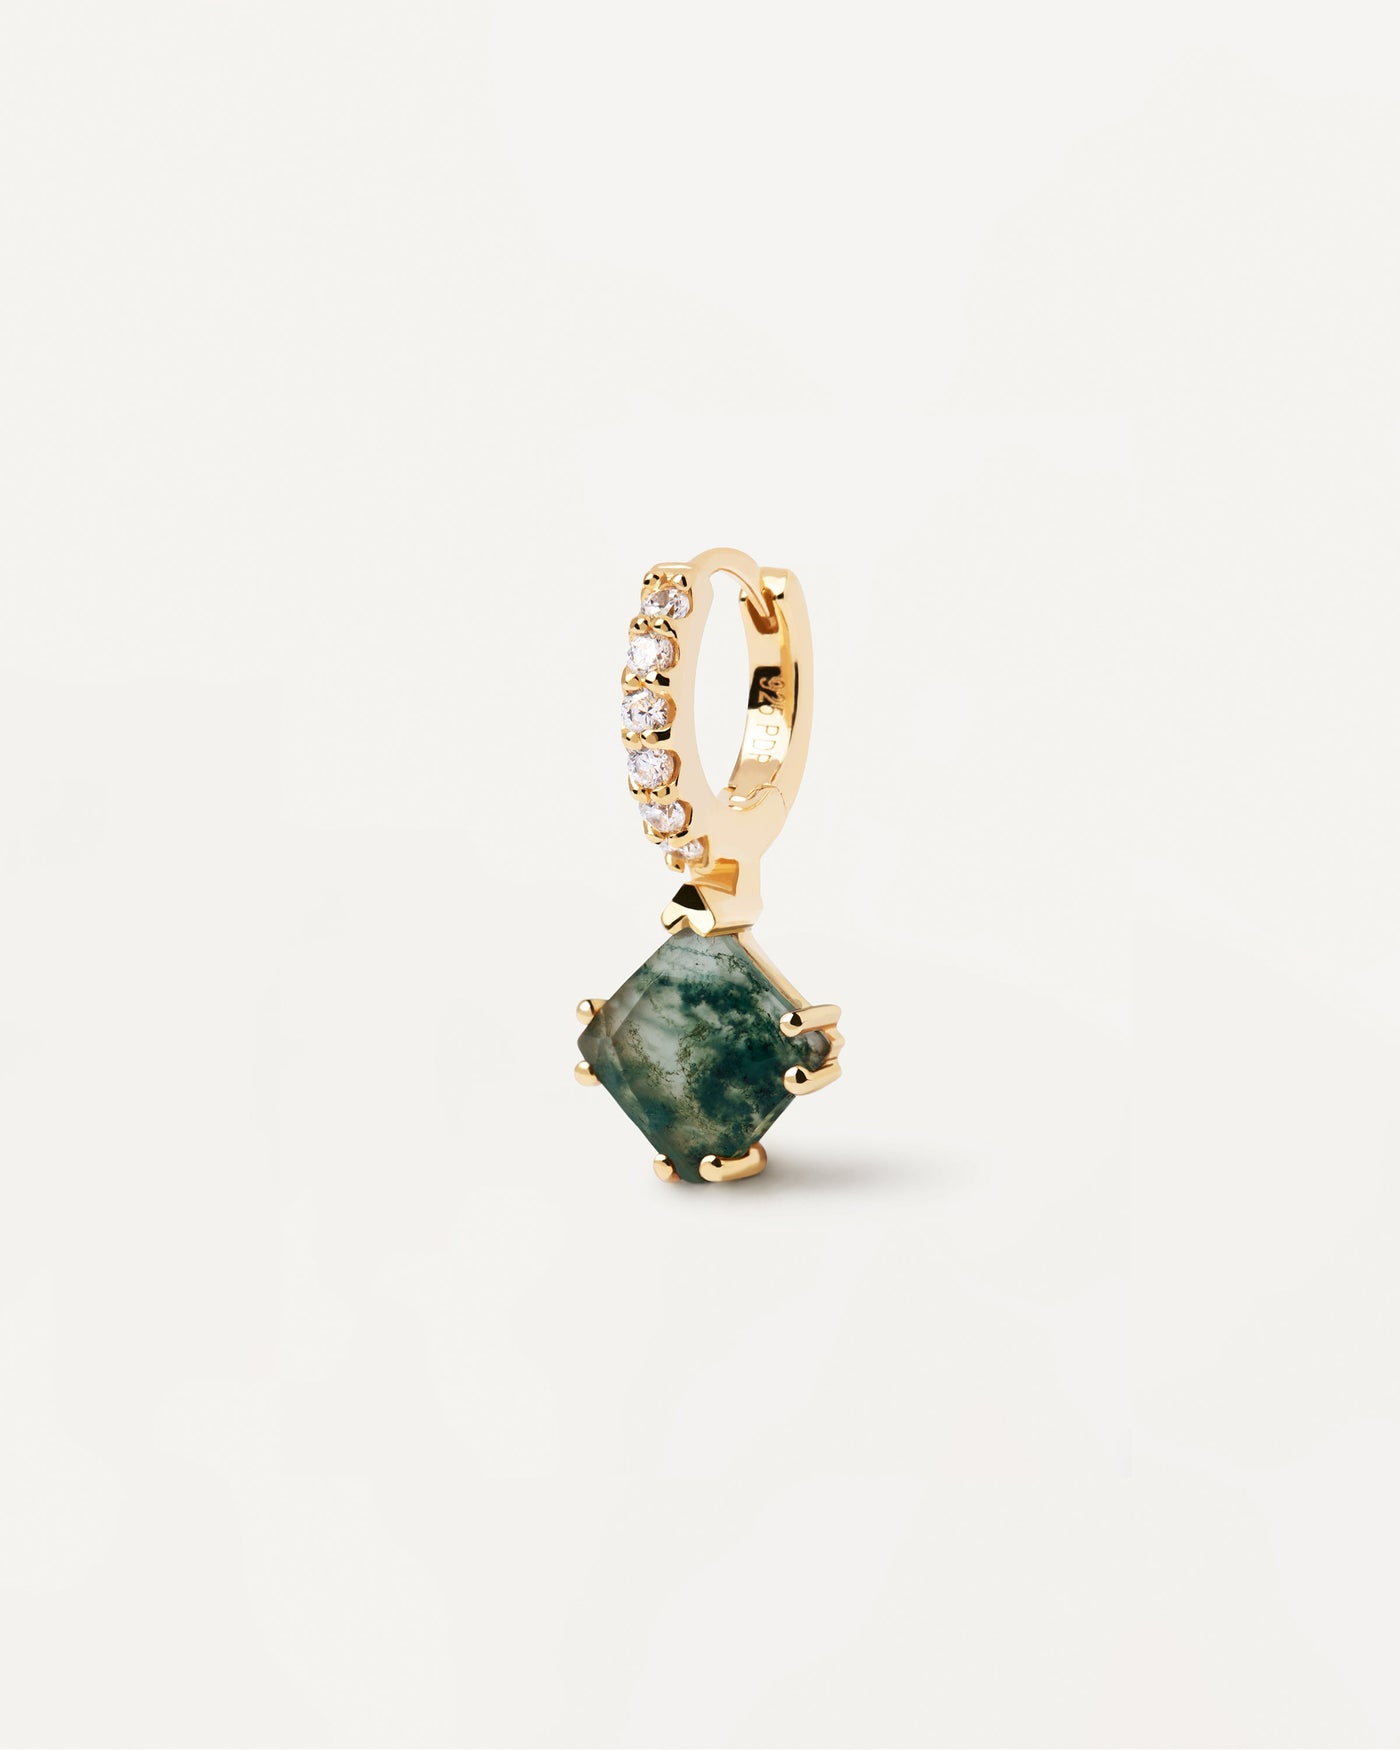 2023 Selection | Fuji Moss Agate Single Earring. Gold-plated hoop ear piercing with white zirconia and dark green squared gemstone pendant. Get the latest arrival from PDPAOLA. Place your order safely and get this Best Seller. Free Shipping.